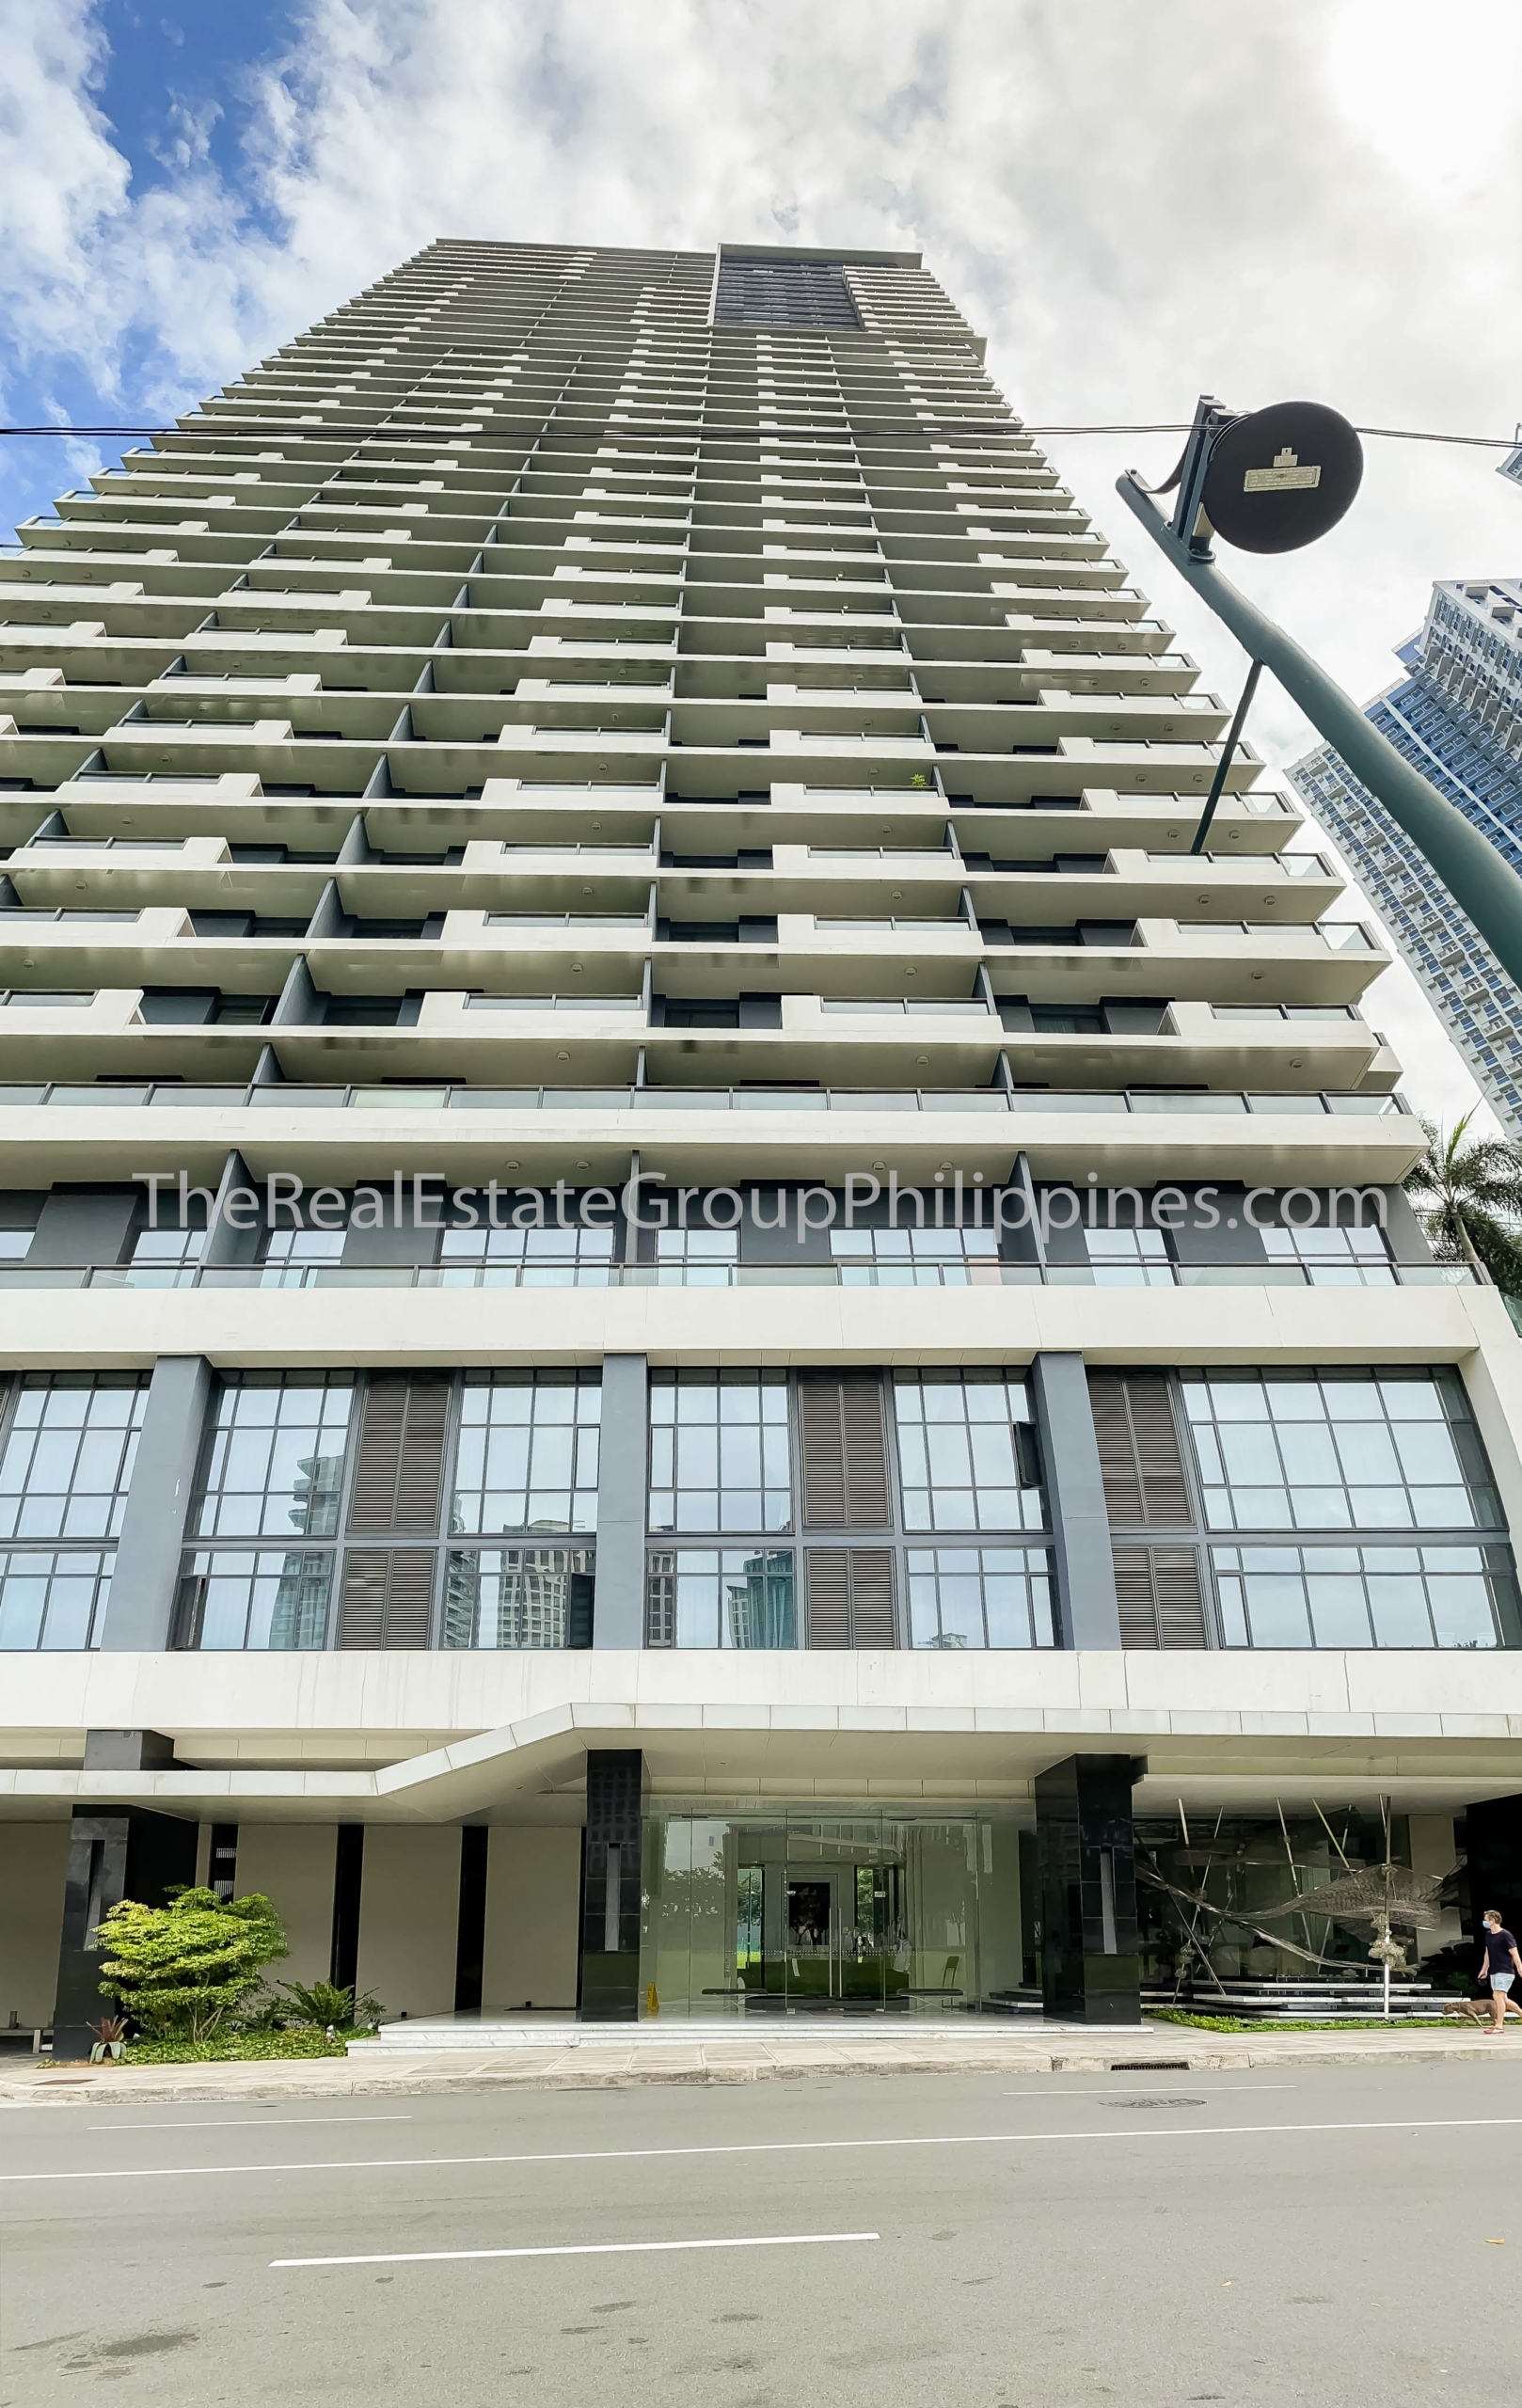 1BR Condo For Rent, Arya Residences, Tower 1, BGC - ₱75K Per Month-2